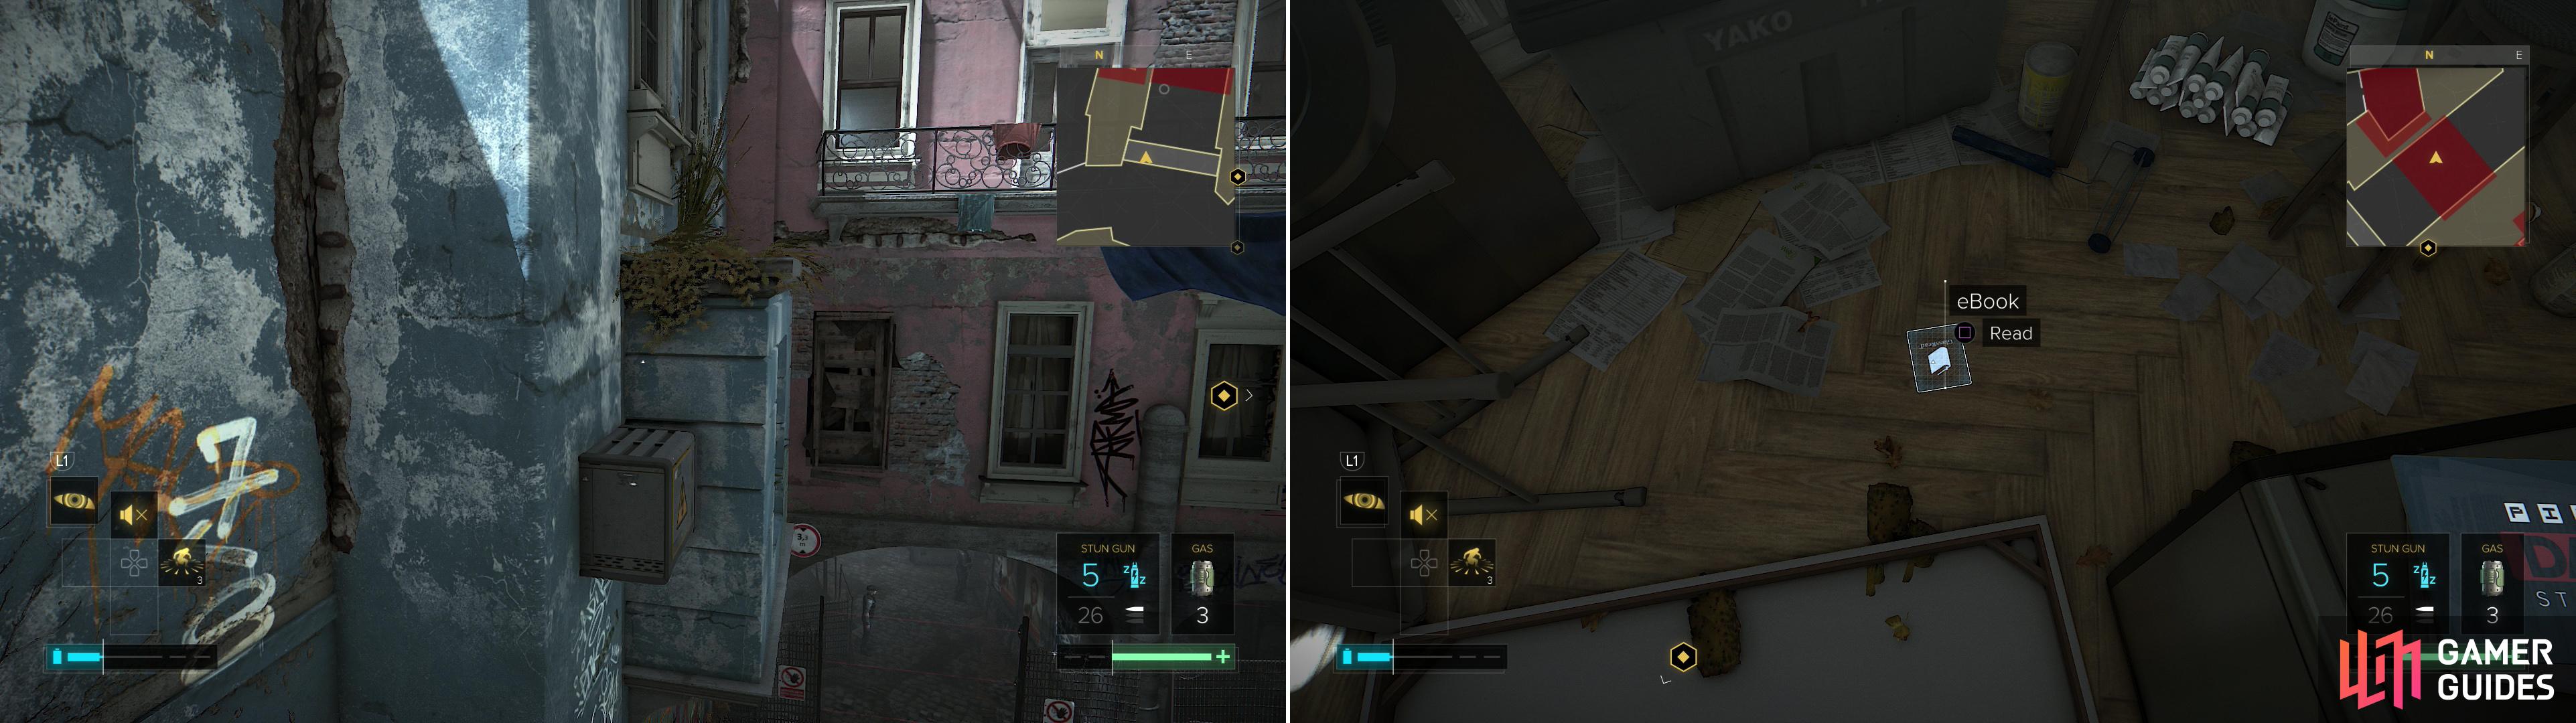 Climb up a lift and jump over to a balcony adorning a pink apartment building (left) inside of which you'll find a way forward - and a variety of collectibles (right).